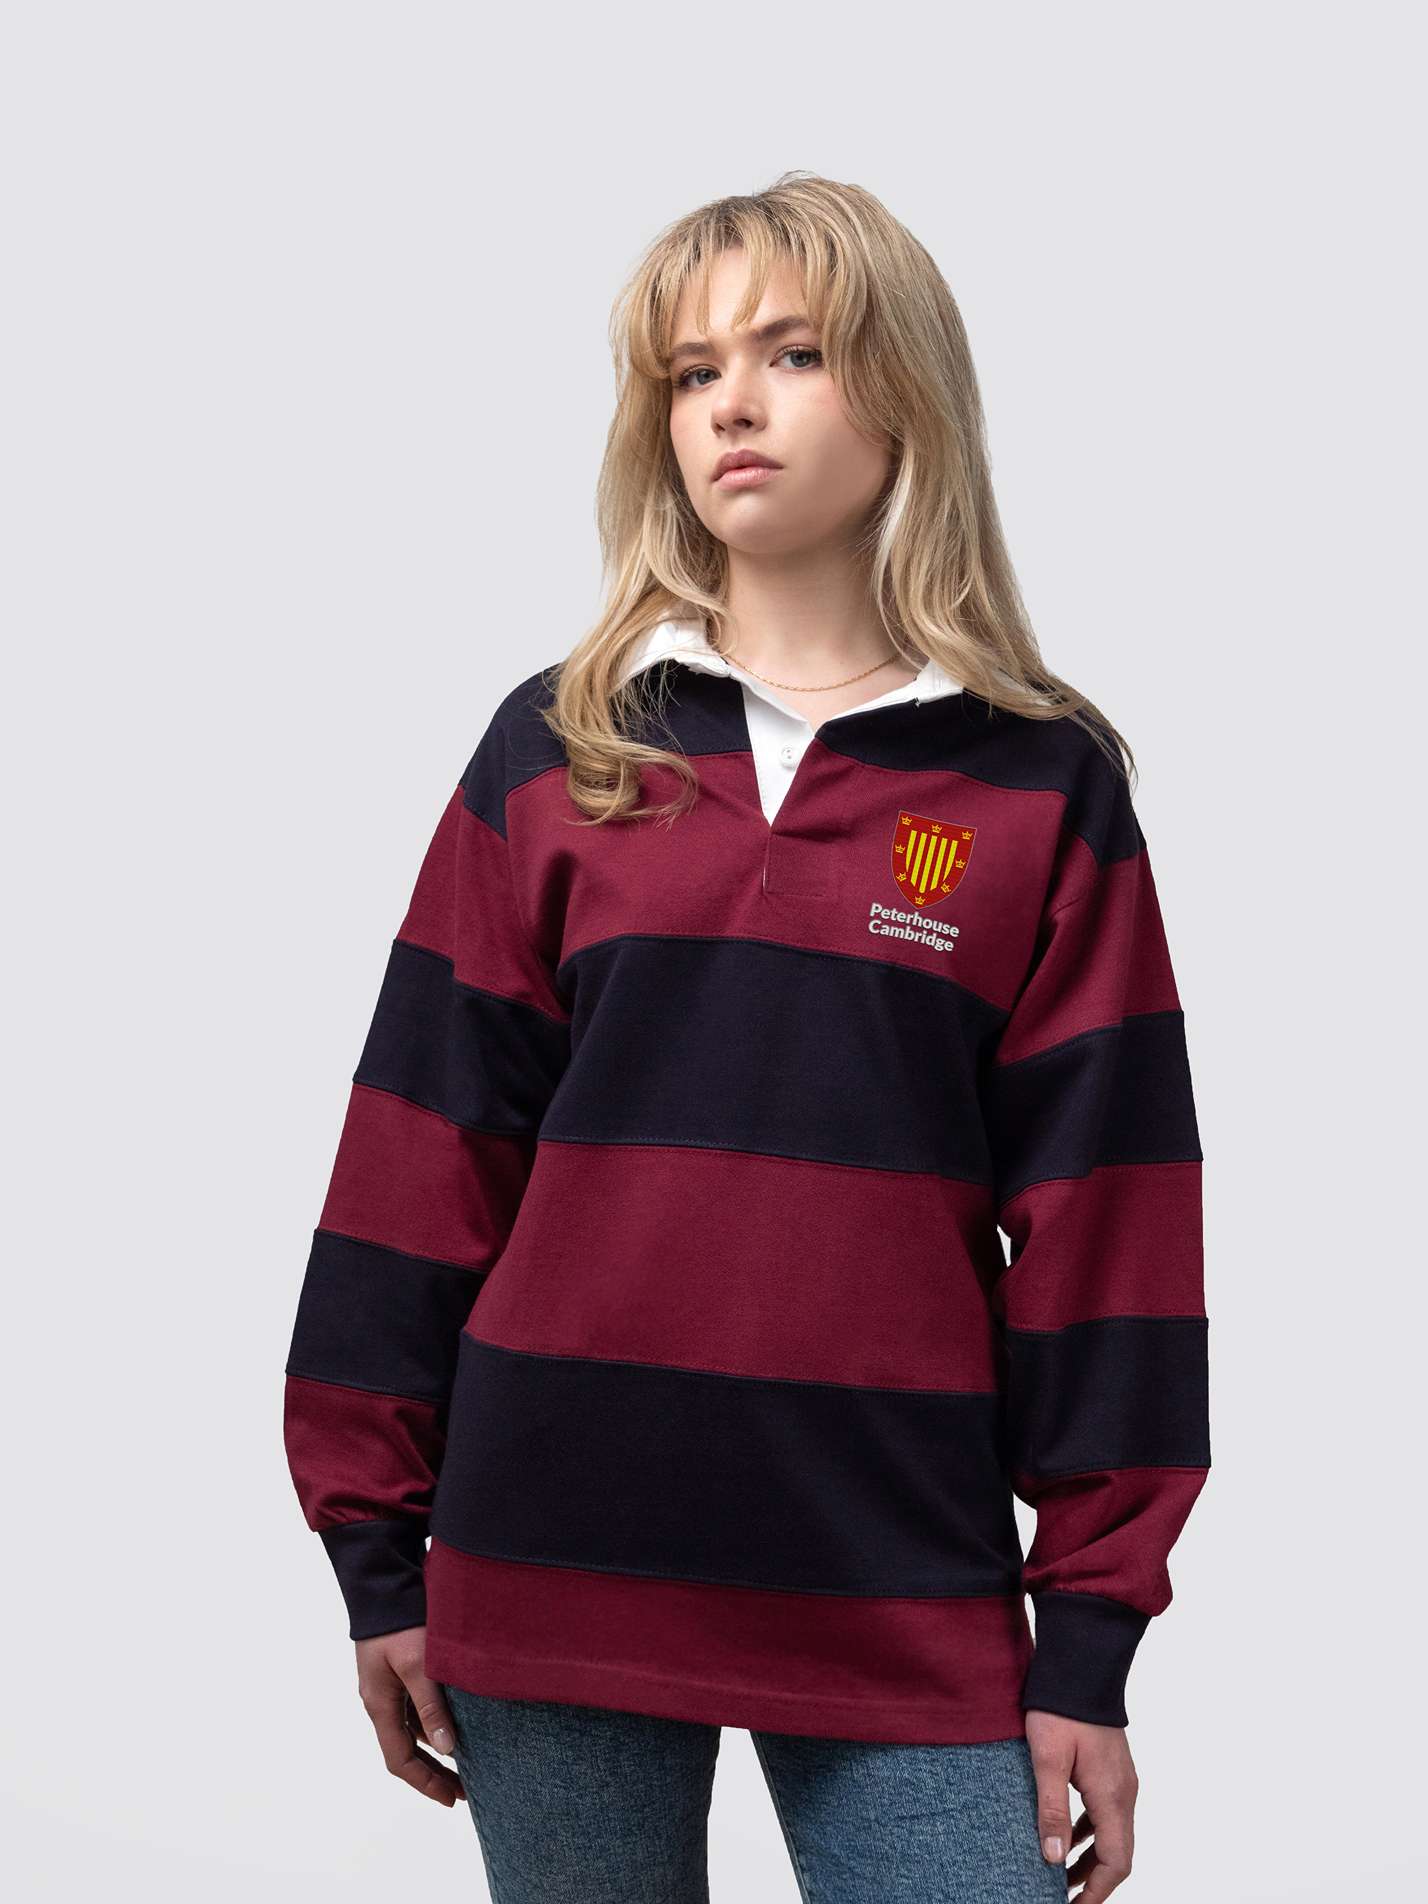 Peterhouse College rugby shirt, with burgundy and navy stripes